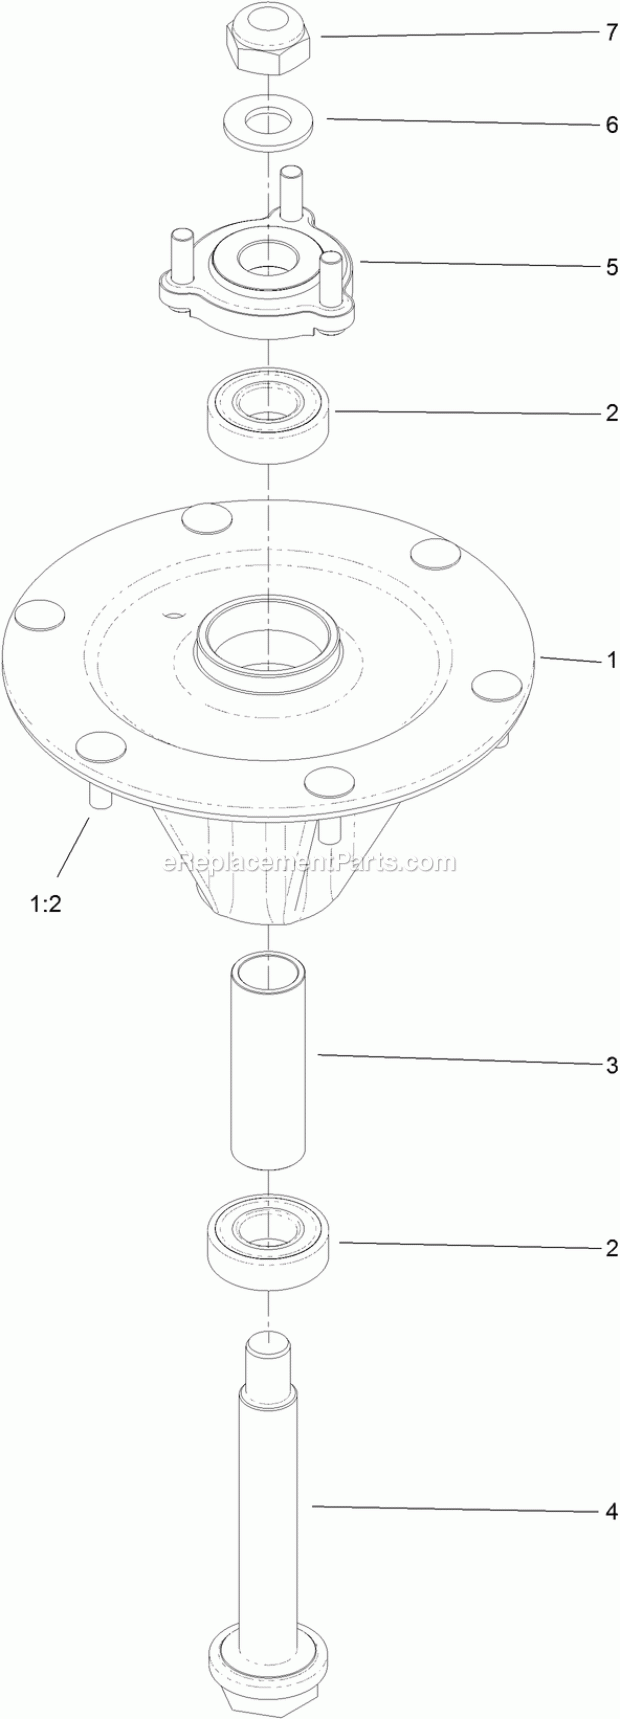 Toro 74519 (400000000-999999999) Grandstand Mower, With 52in Turbo Force Cutting Unit, 2017 Spindle Assembly No. 127-0560 Diagram